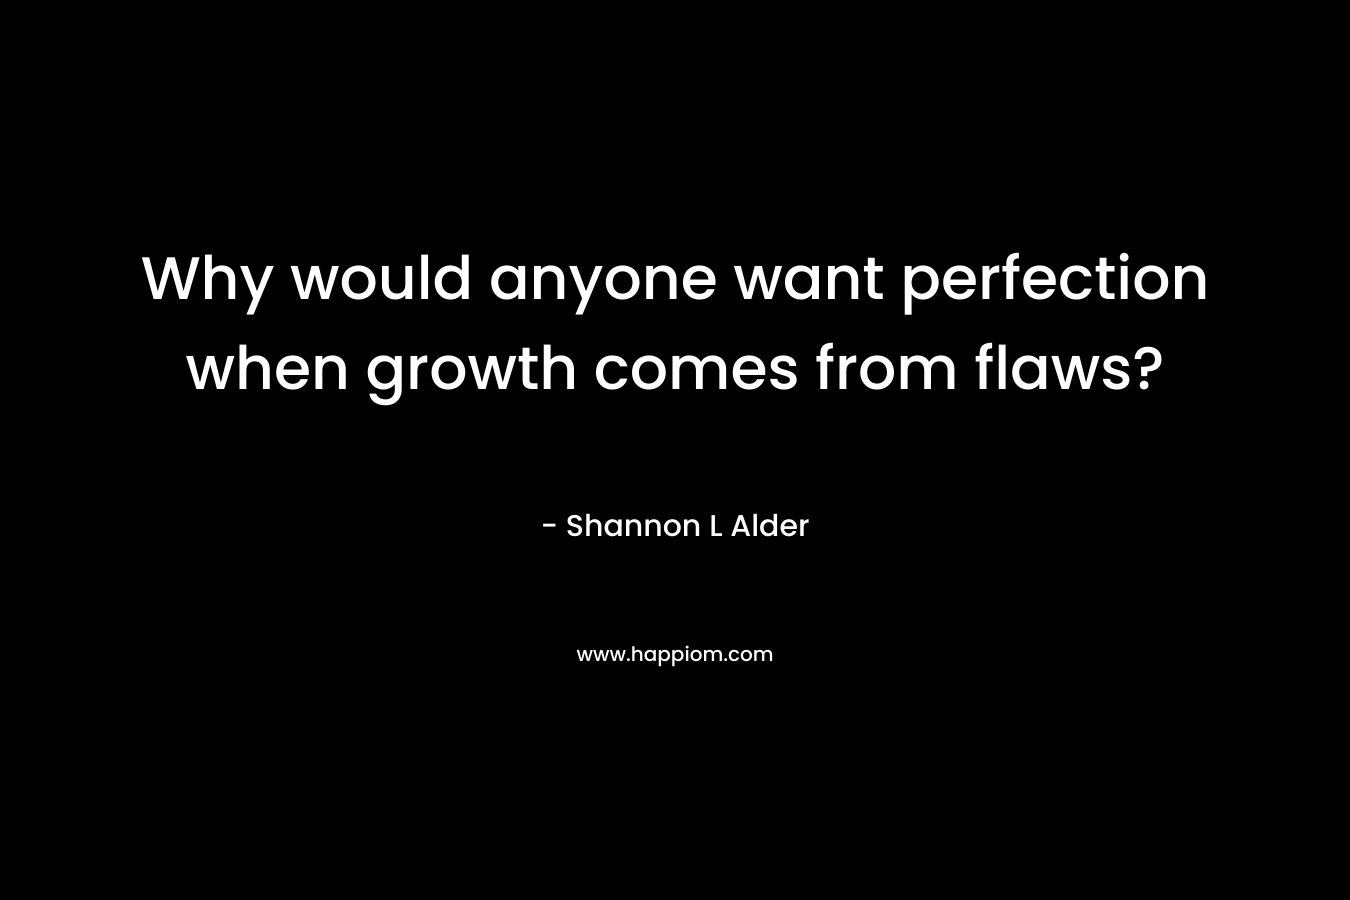 Why would anyone want perfection when growth comes from flaws? – Shannon L Alder